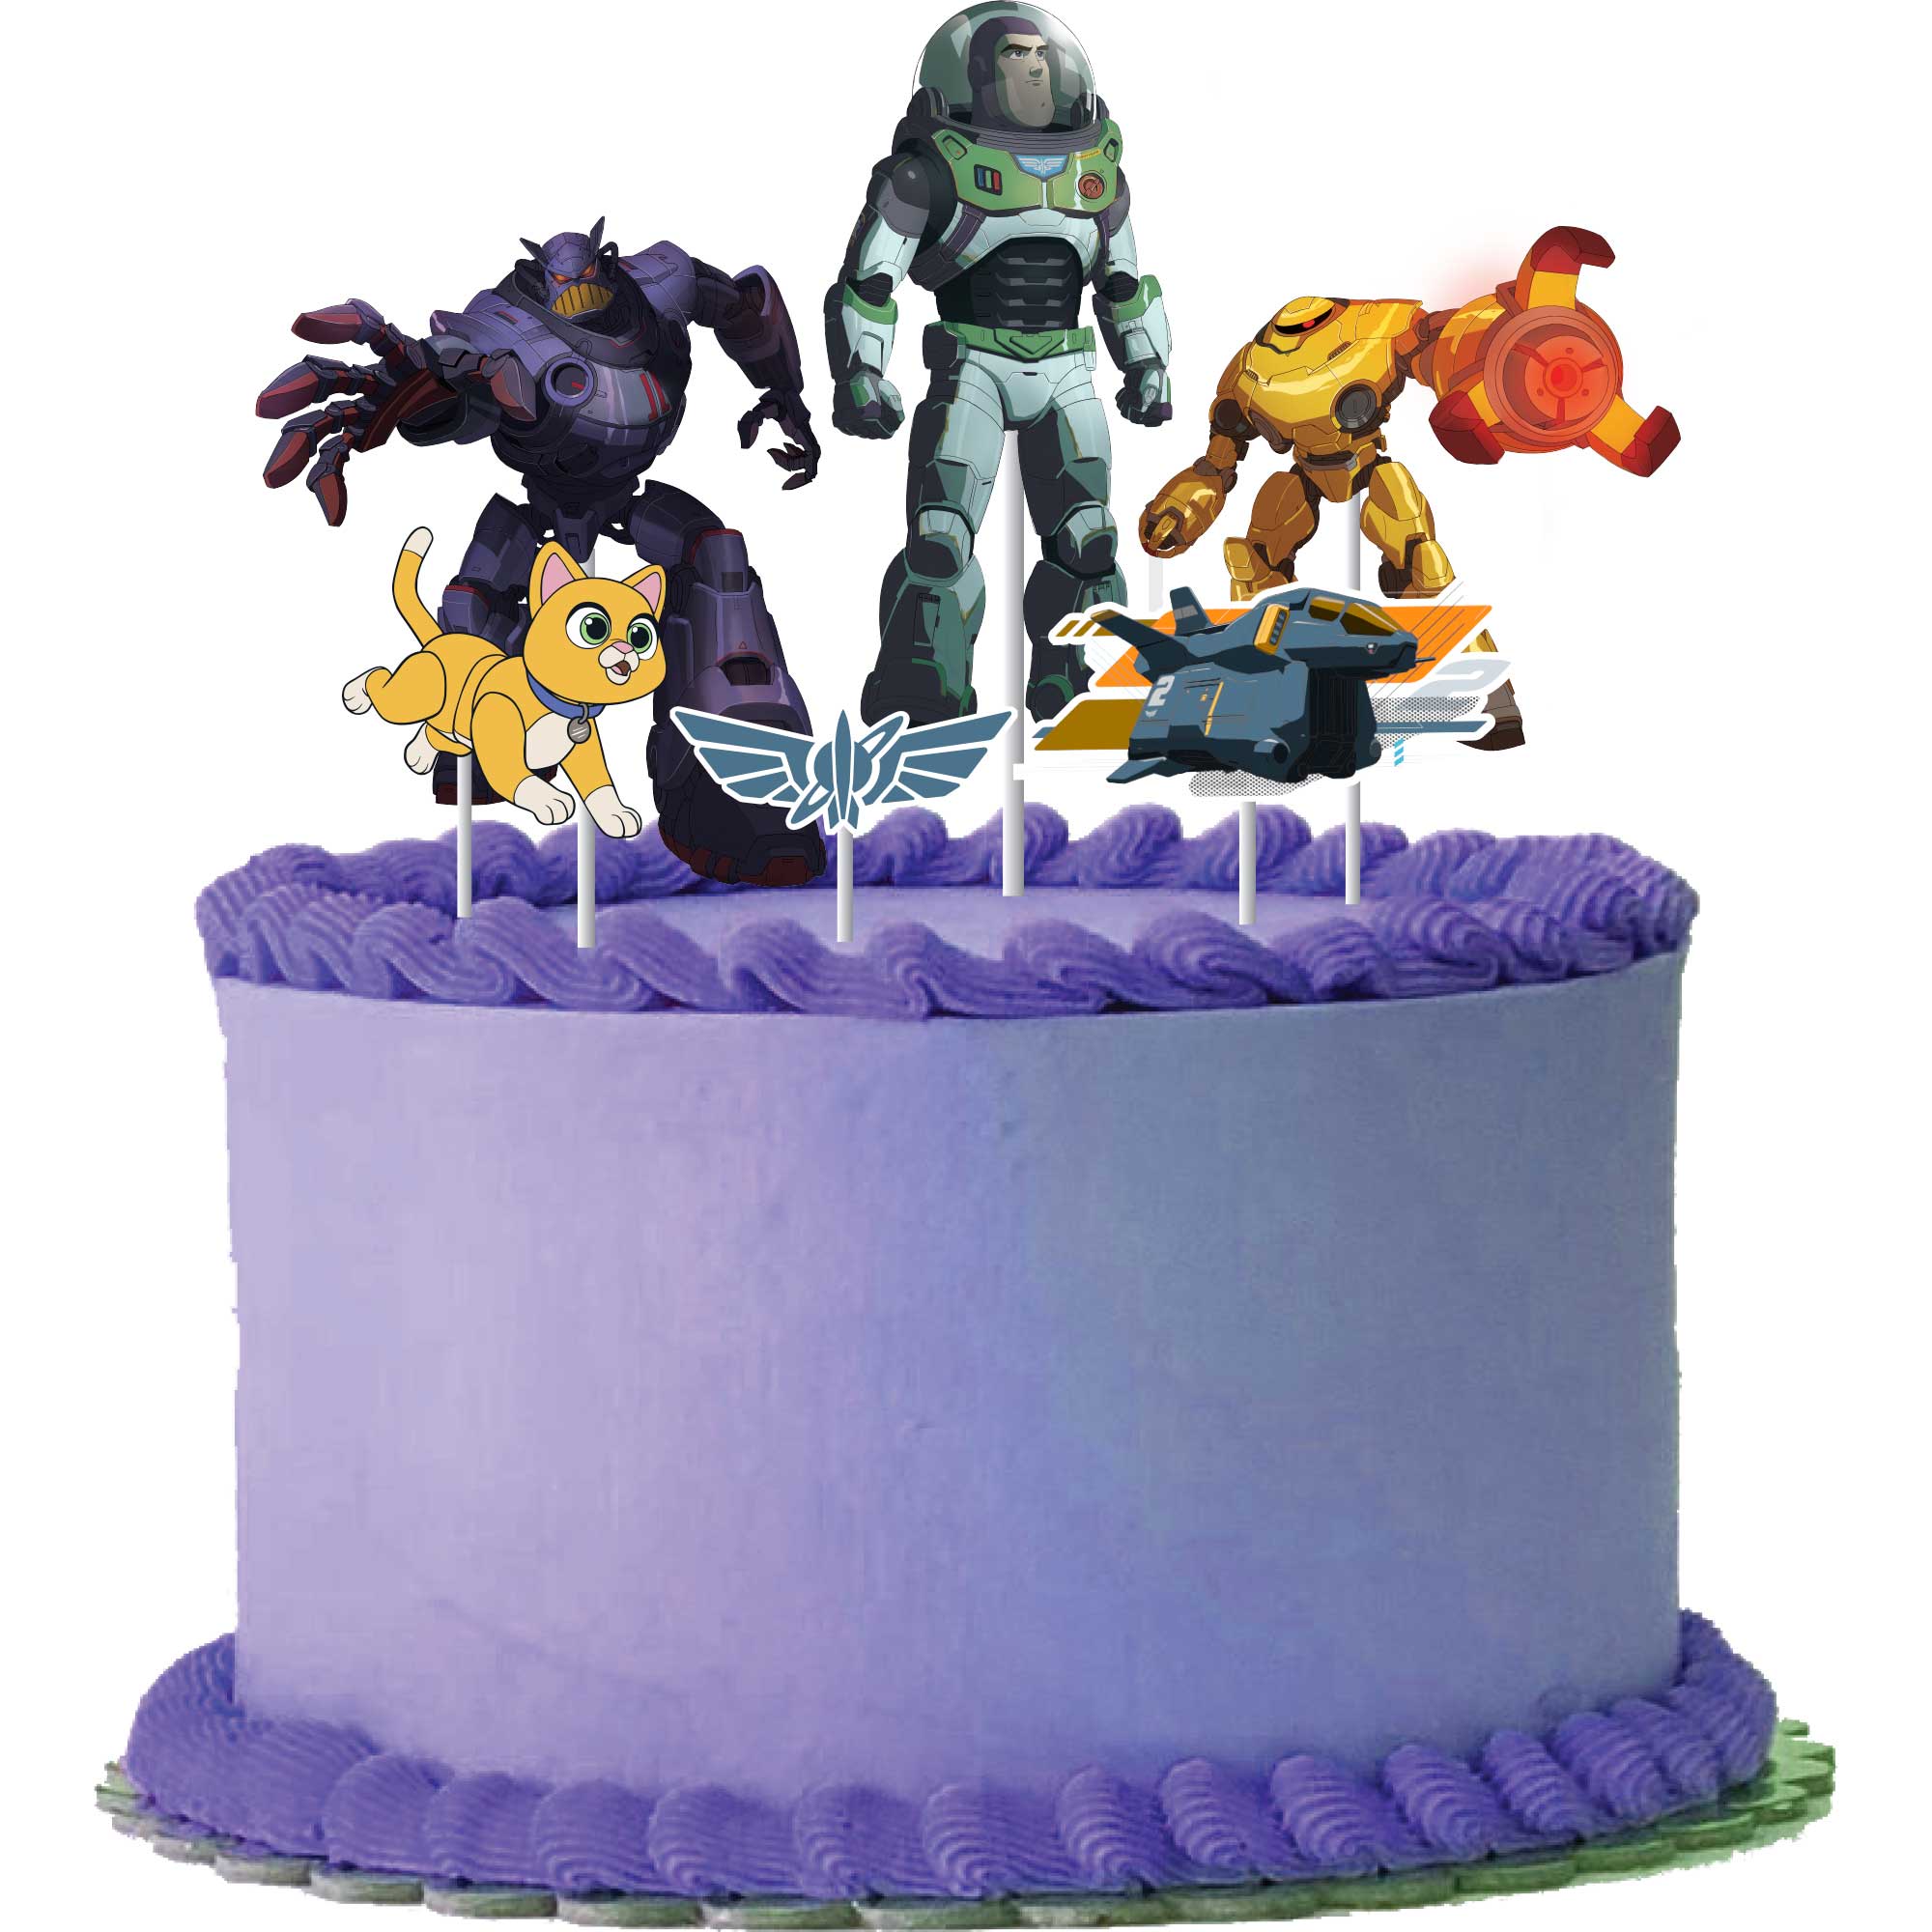 Buzz Lightyear Cake Topper Kit - 6 Pack Default Title